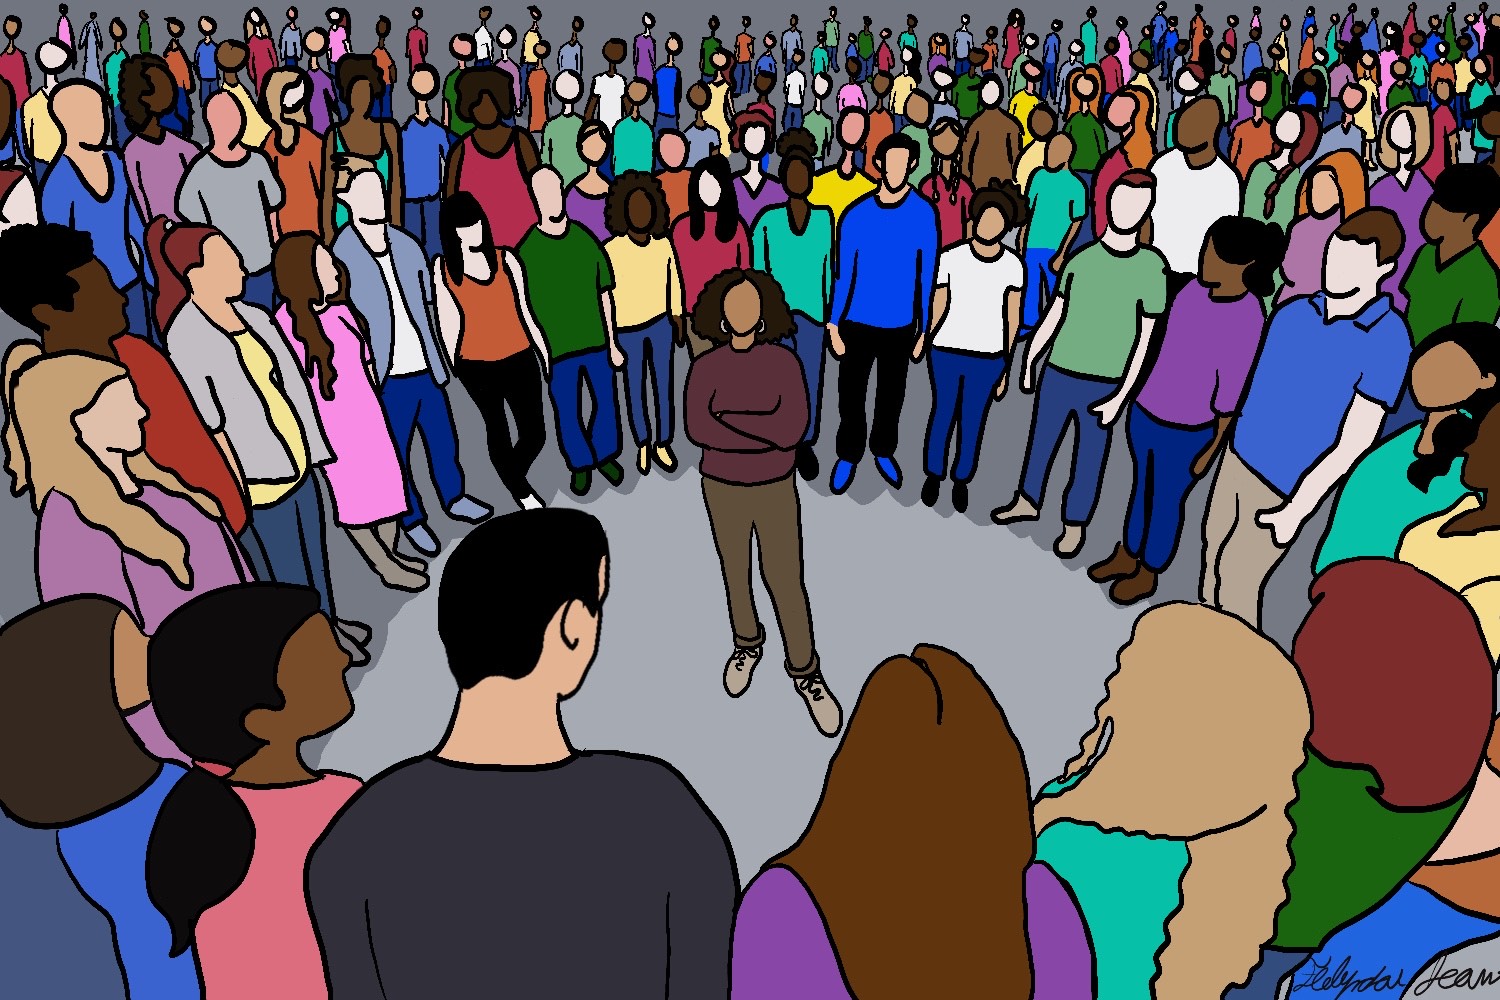 Image: Illustration of a Black woman standing defiantly at the center of a group of people who turned toward her expectantly. Illustration by Flolynda Jean.